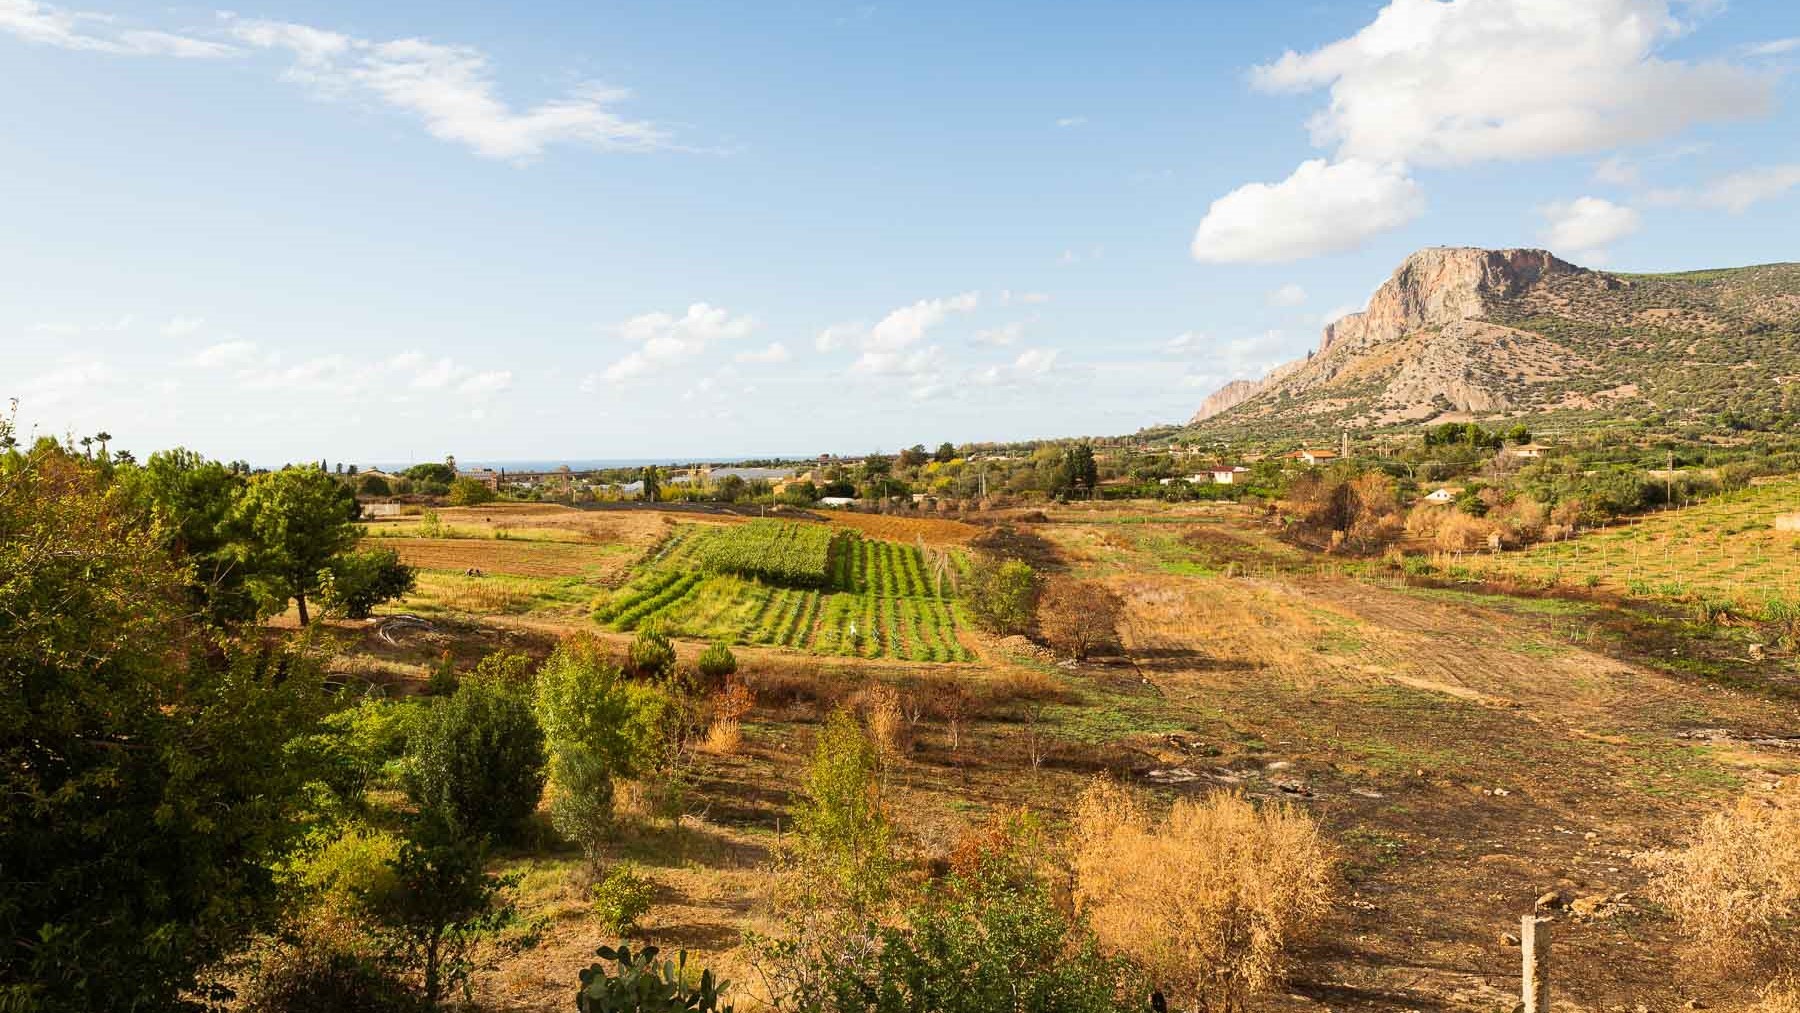 The creation of a “food forest” reproducing the natural eco-system in Sicily